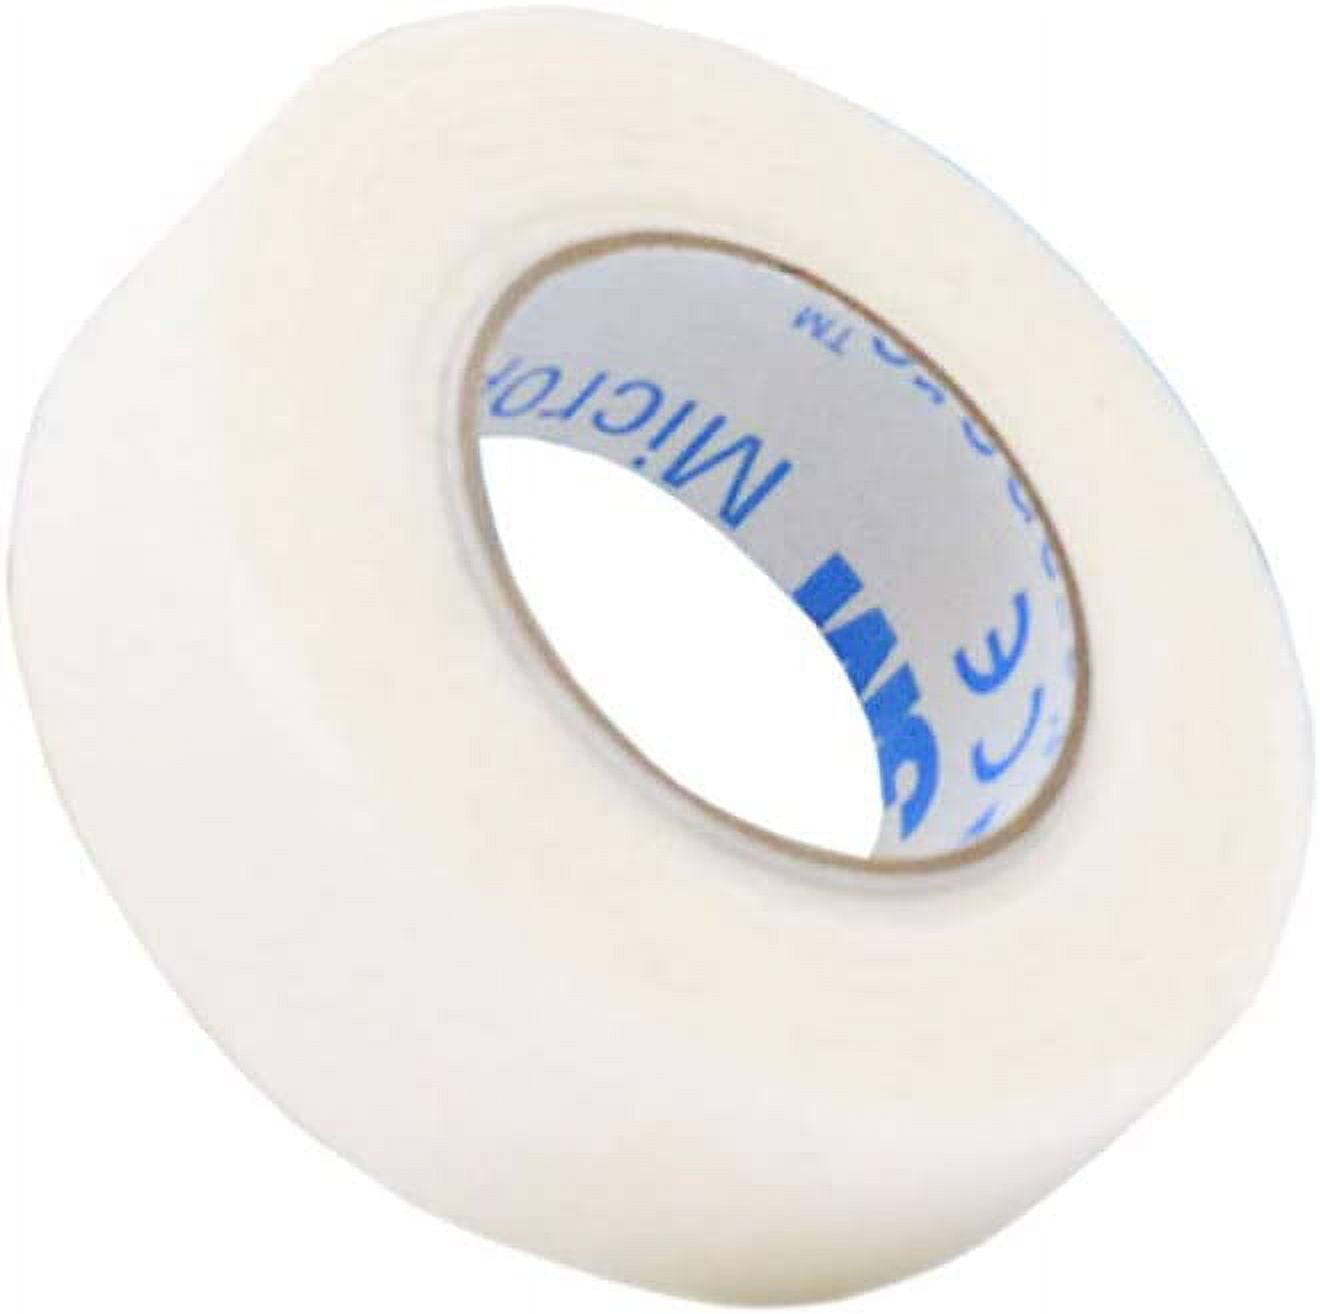 Micropore Surgical Medical Tape, 3 Inch X 10 Yards, Paper, 3M 1530-3, White  - Each